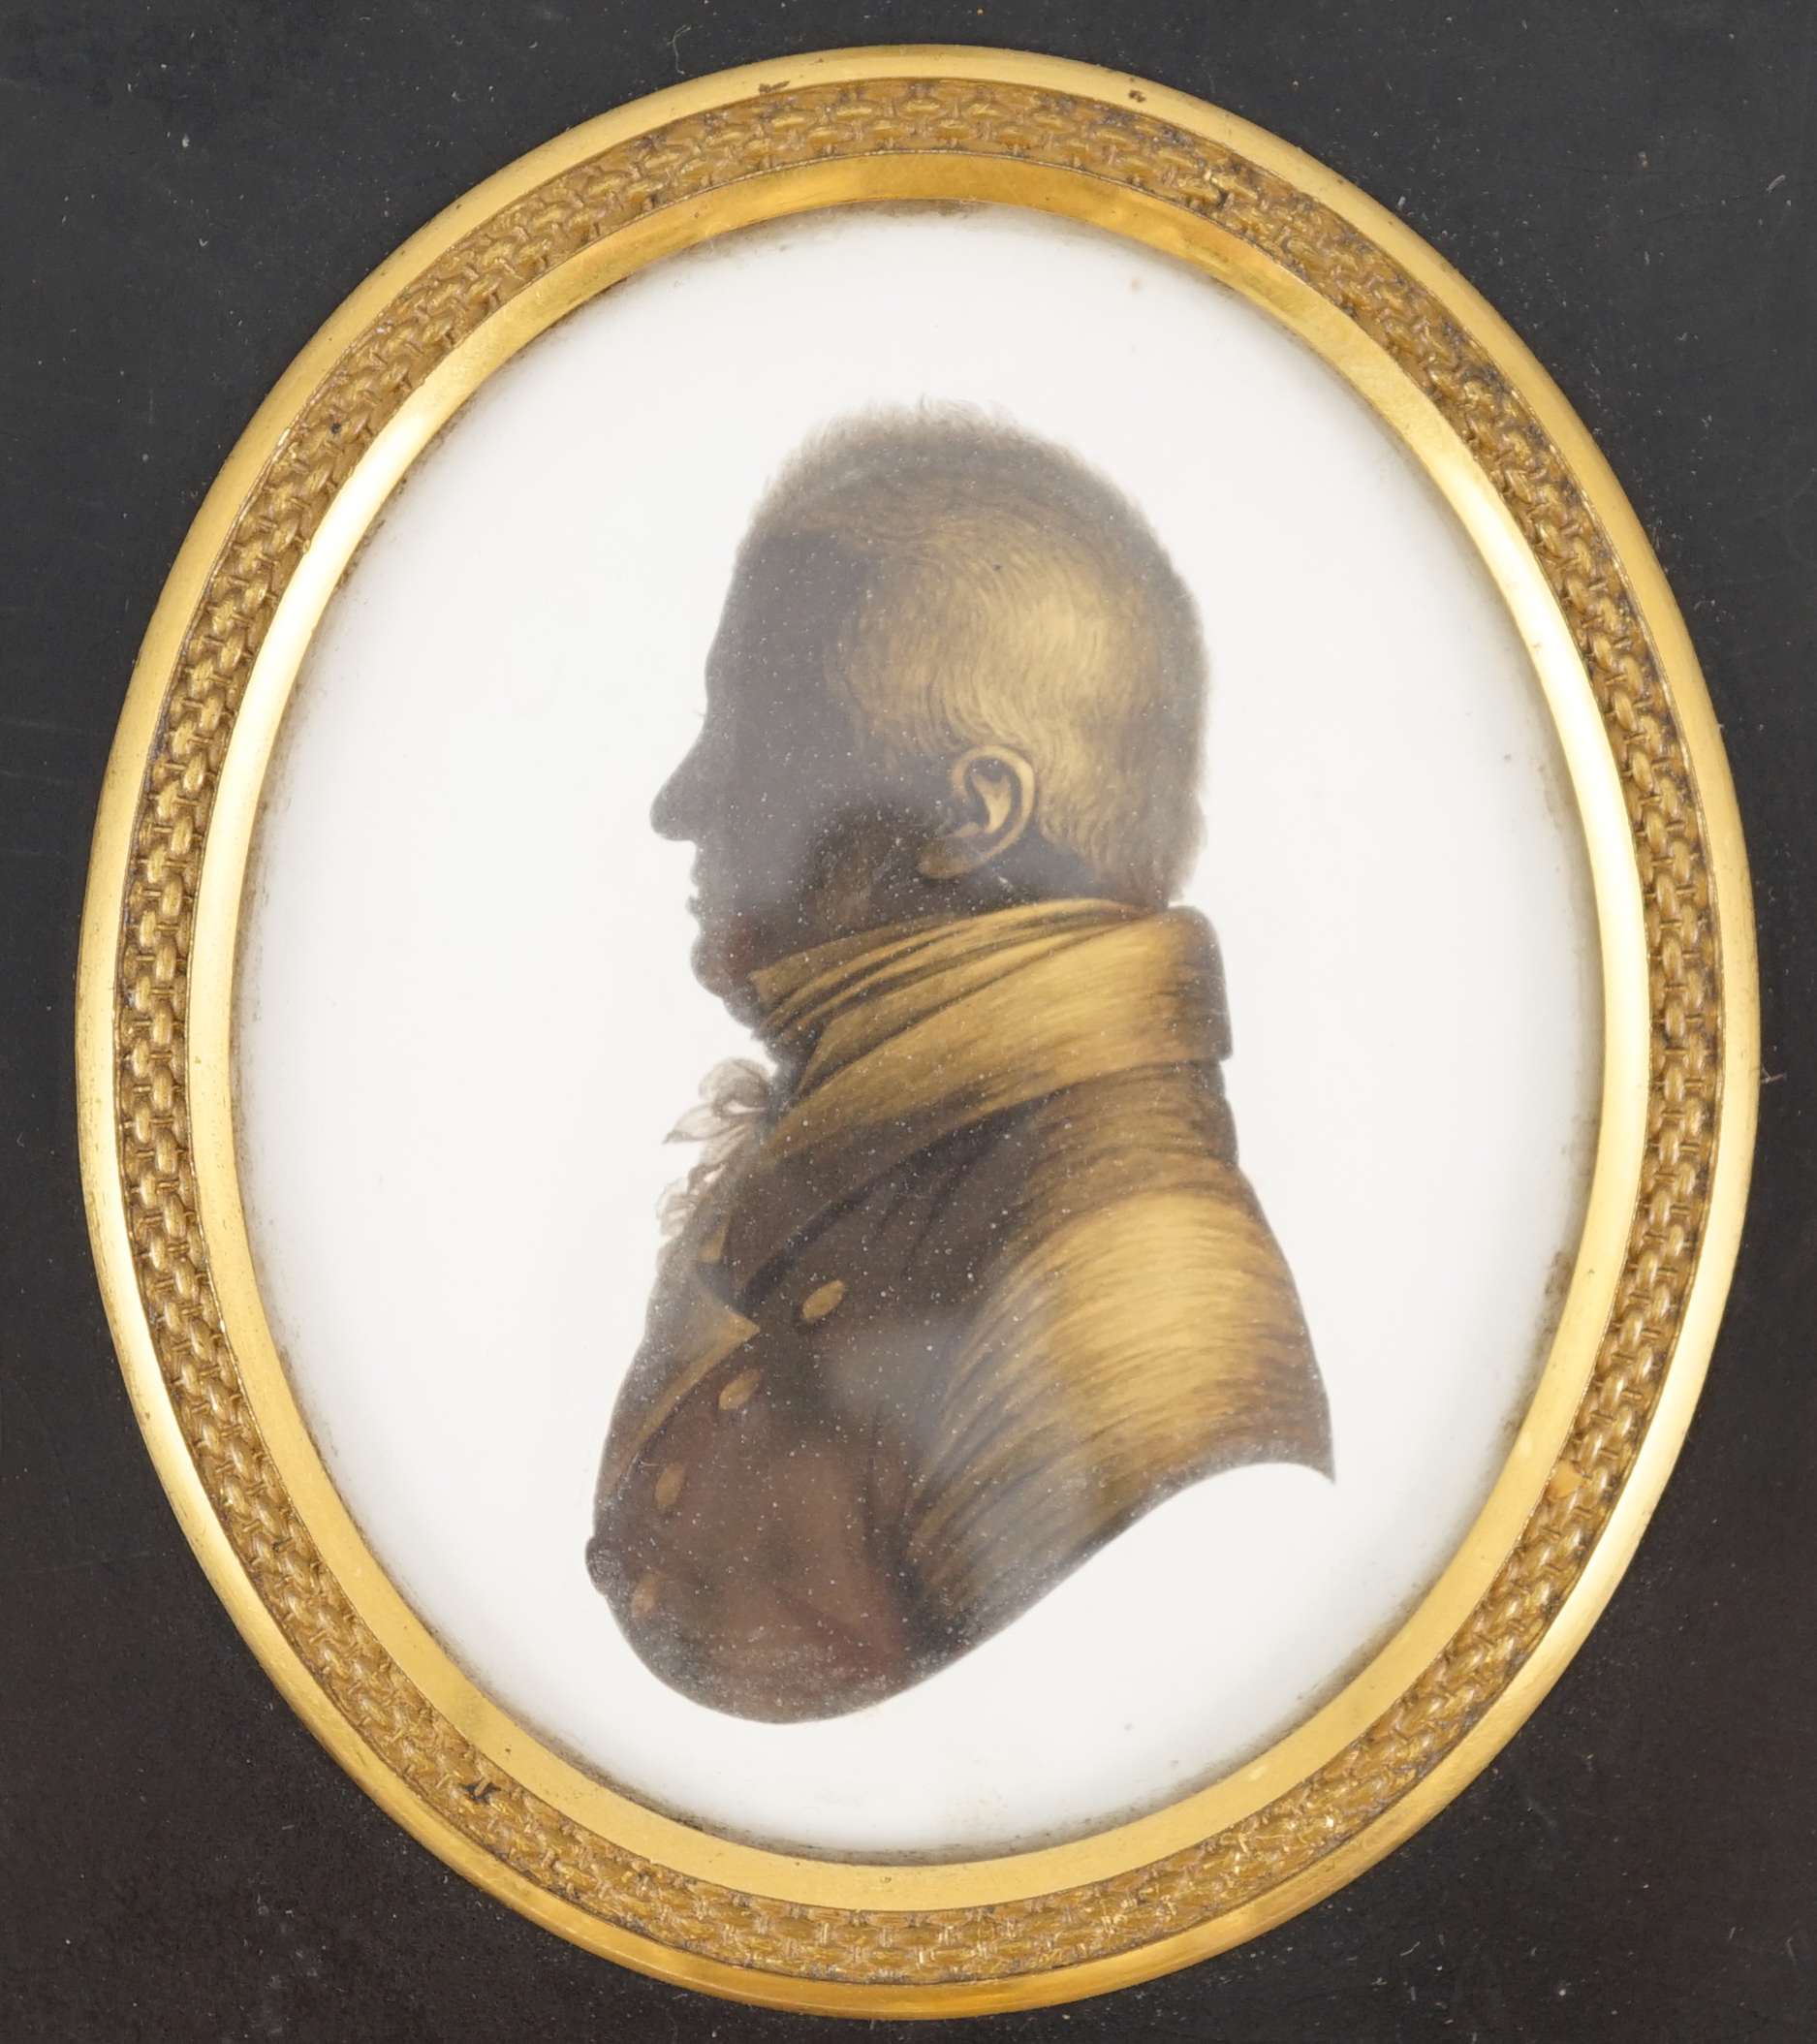 John Miers (1756-1821), Silhouette of 'Mr Warren', painted and bronzed plaster, 8 x 6.5cm.